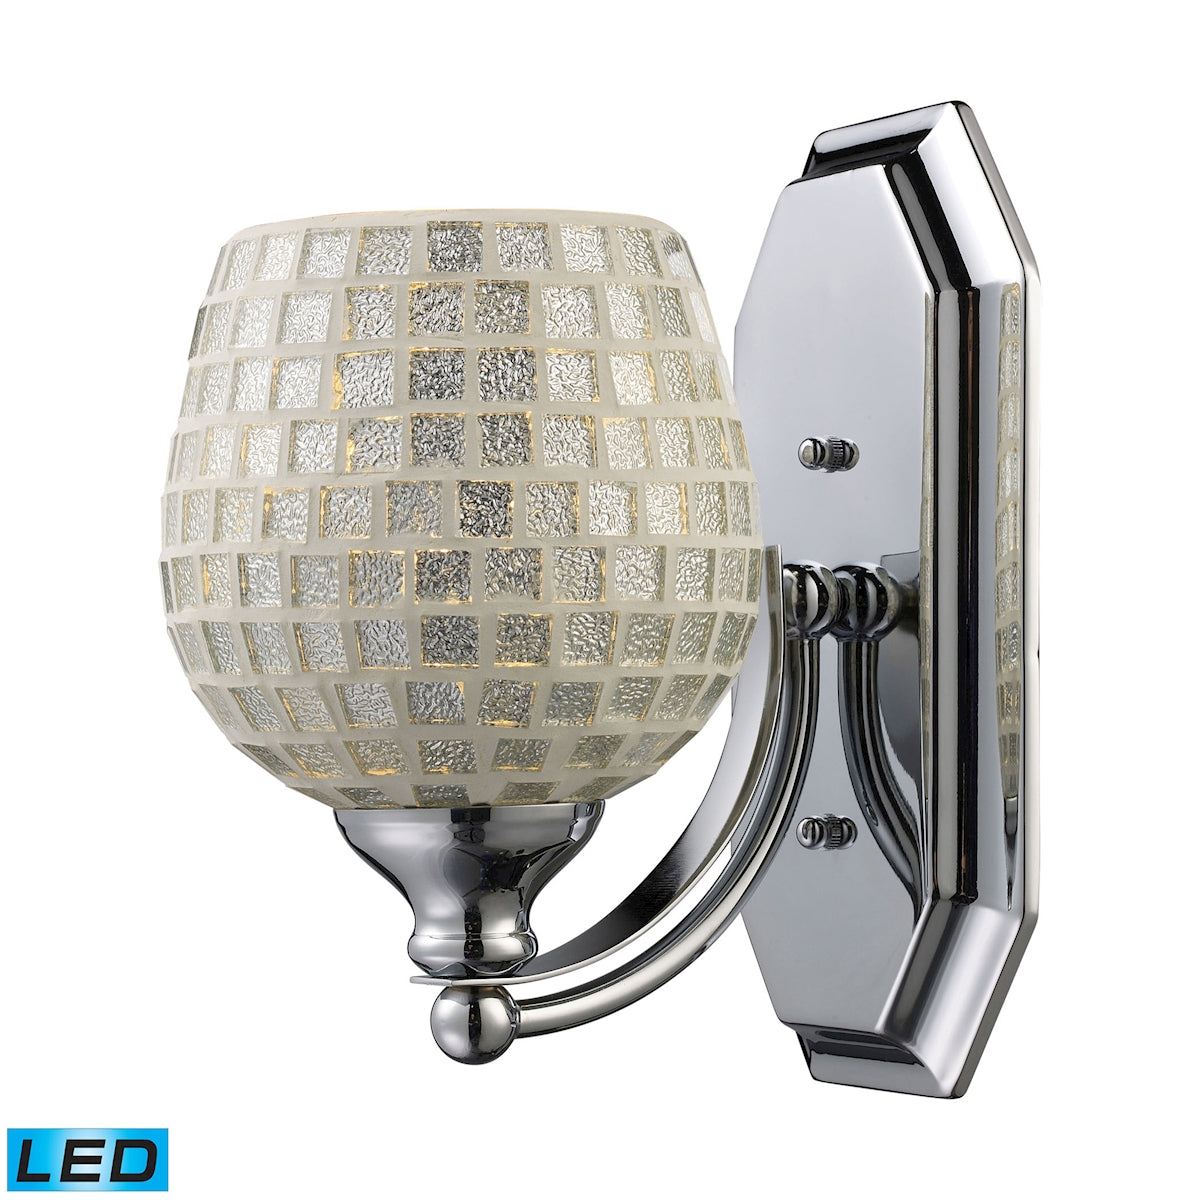 ELK Lighting 570-1C-SLV-LED Mix and Match Vanity 1-Light Wall Lamp in Chrome with Silver Glass - Includes LED Bulb